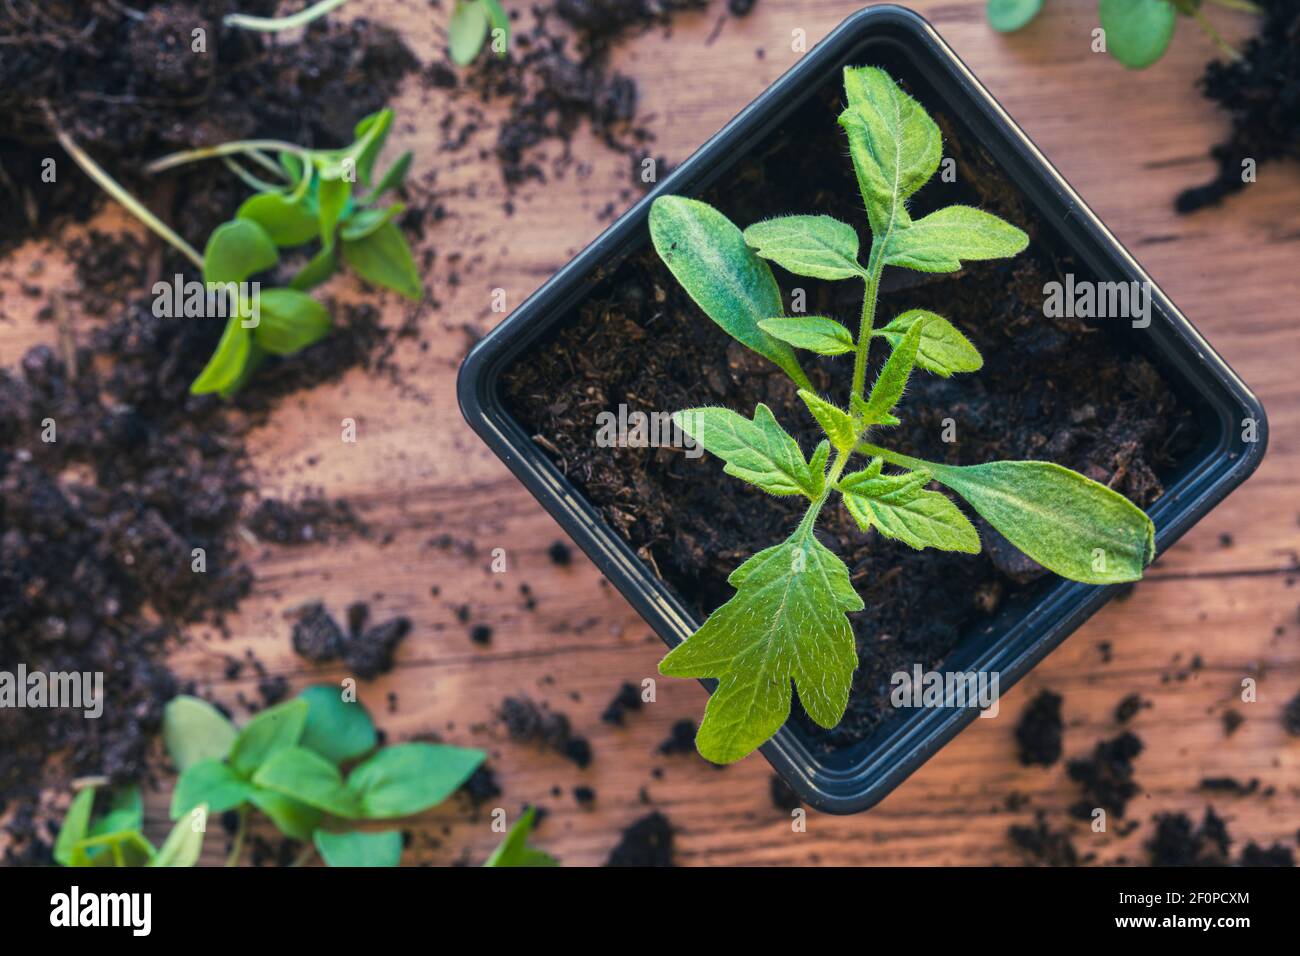 A young Tigrella Tomato seedling in a plant pot, view from above. Spring seedling preparation homegrown produce gardening hobby. Stock Photo